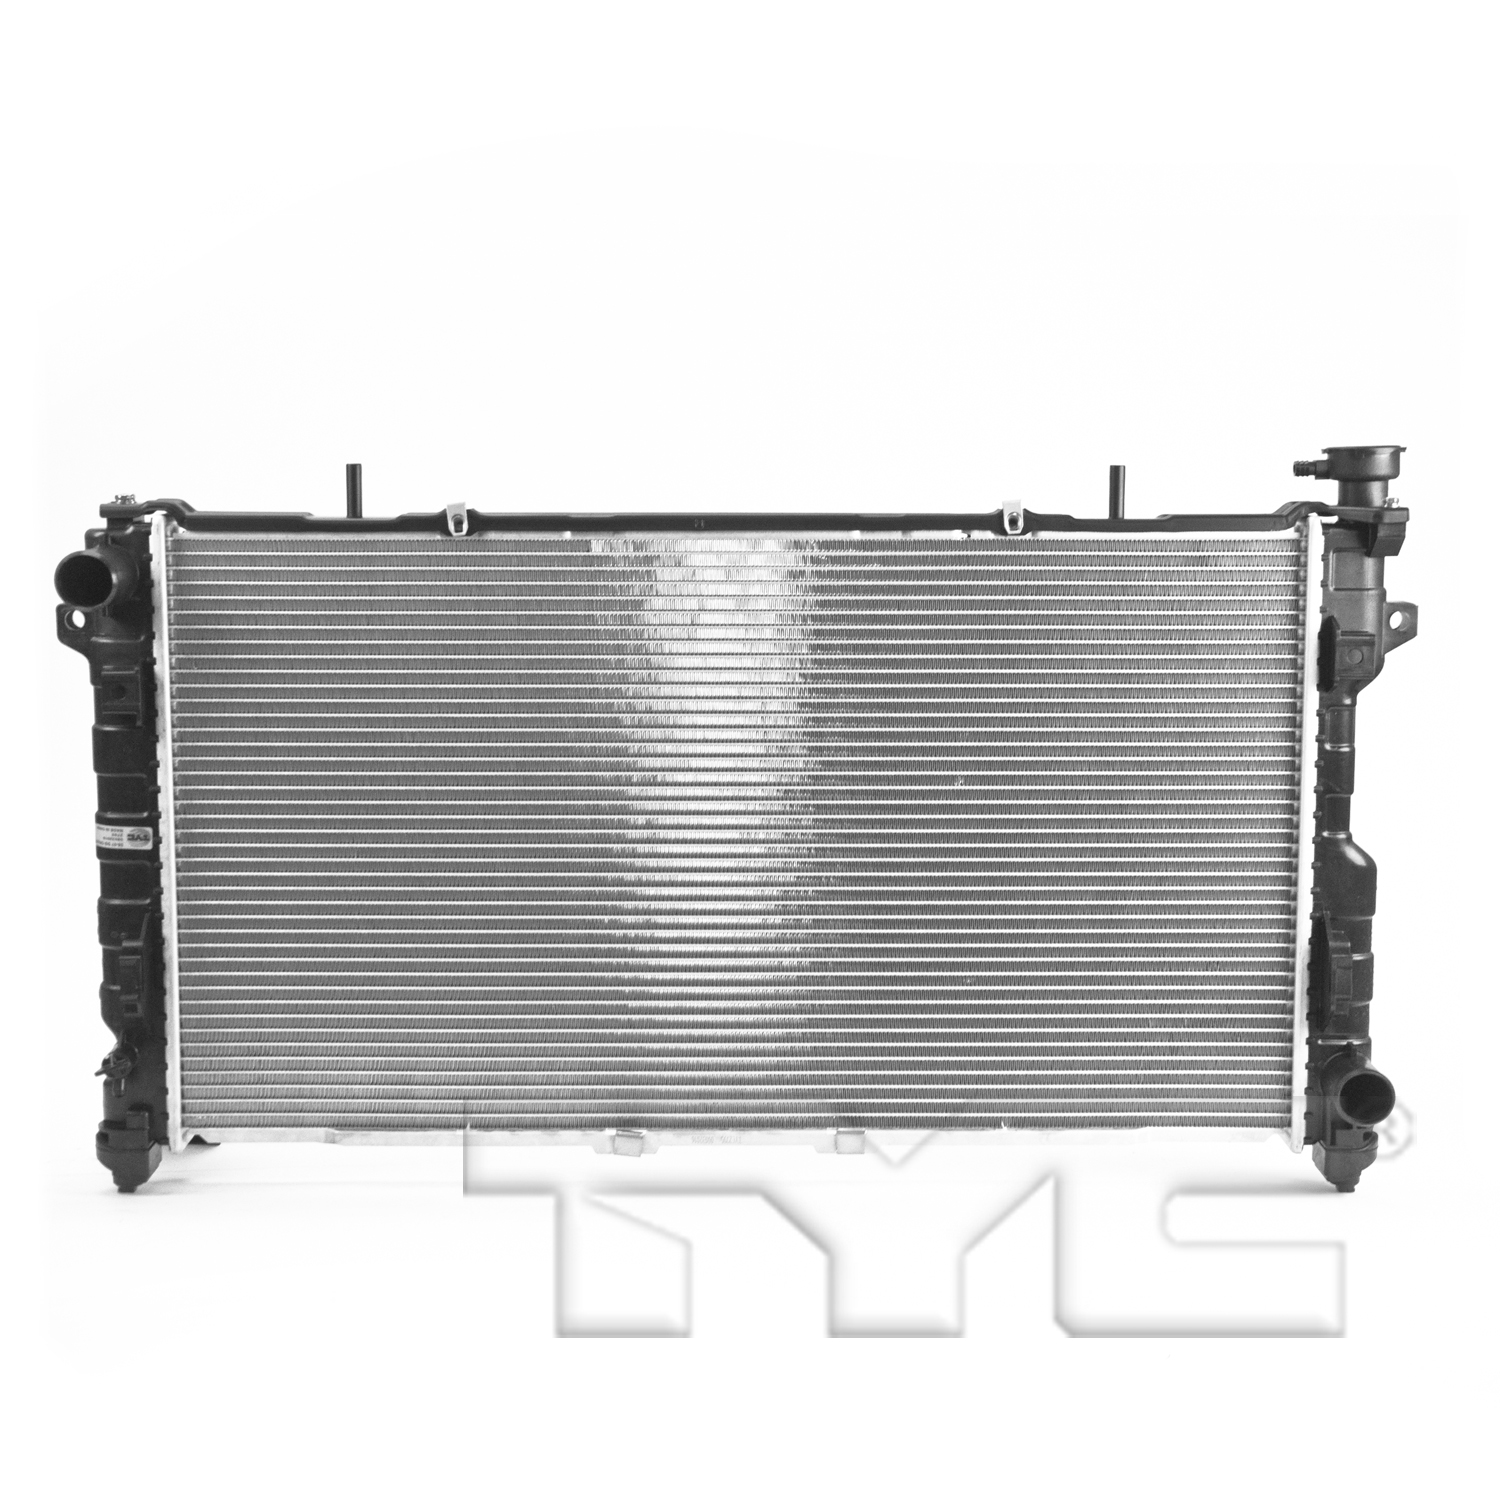 Aftermarket RADIATORS for CHRYSLER - TOWN & COUNTRY, TOWN & COUNTRY,05-05,Radiator assembly